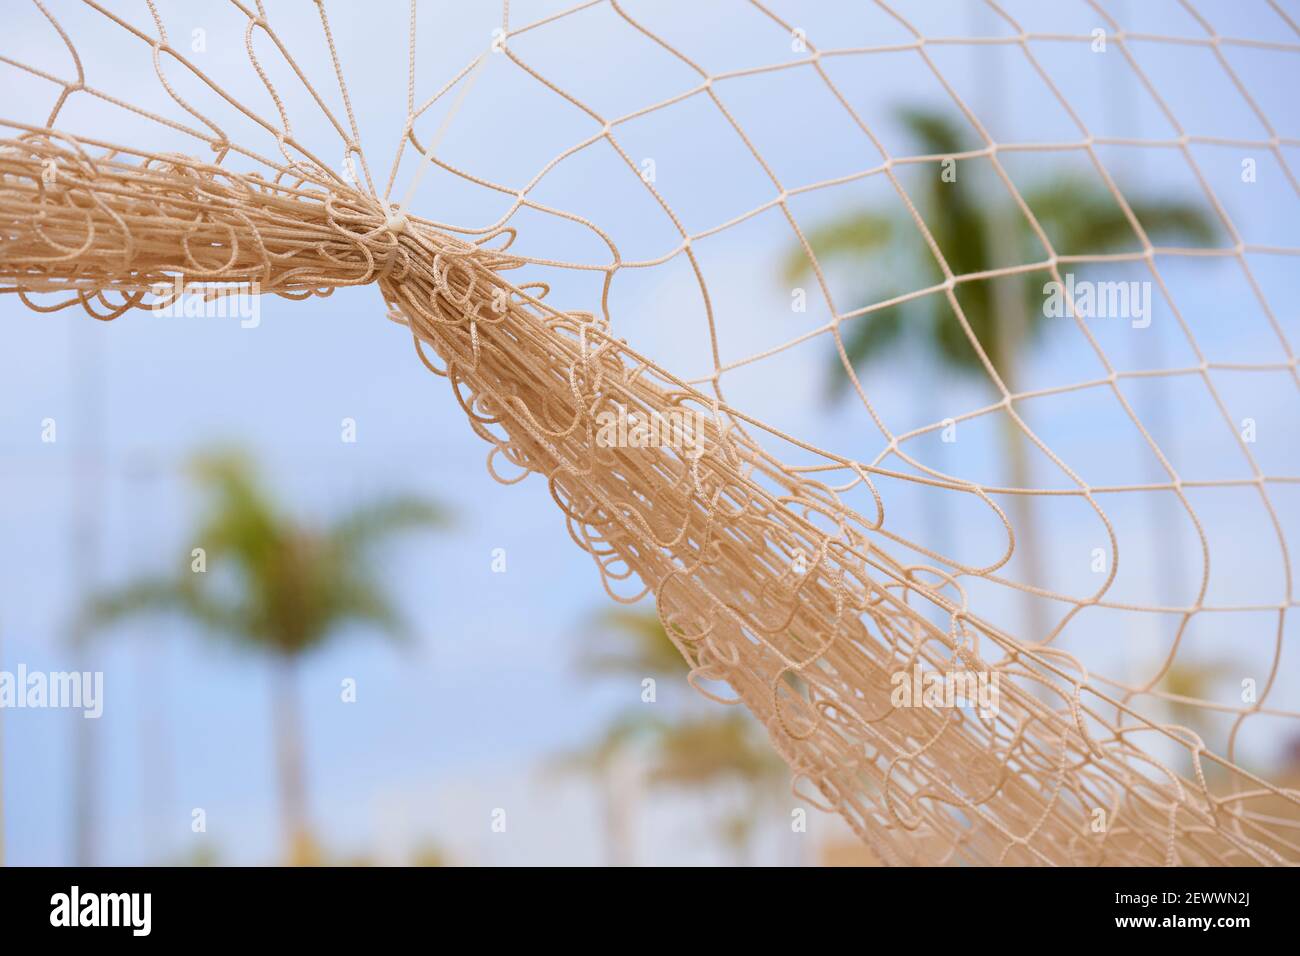 Sport net tight together with cable tight with palms in the background Stock Photo